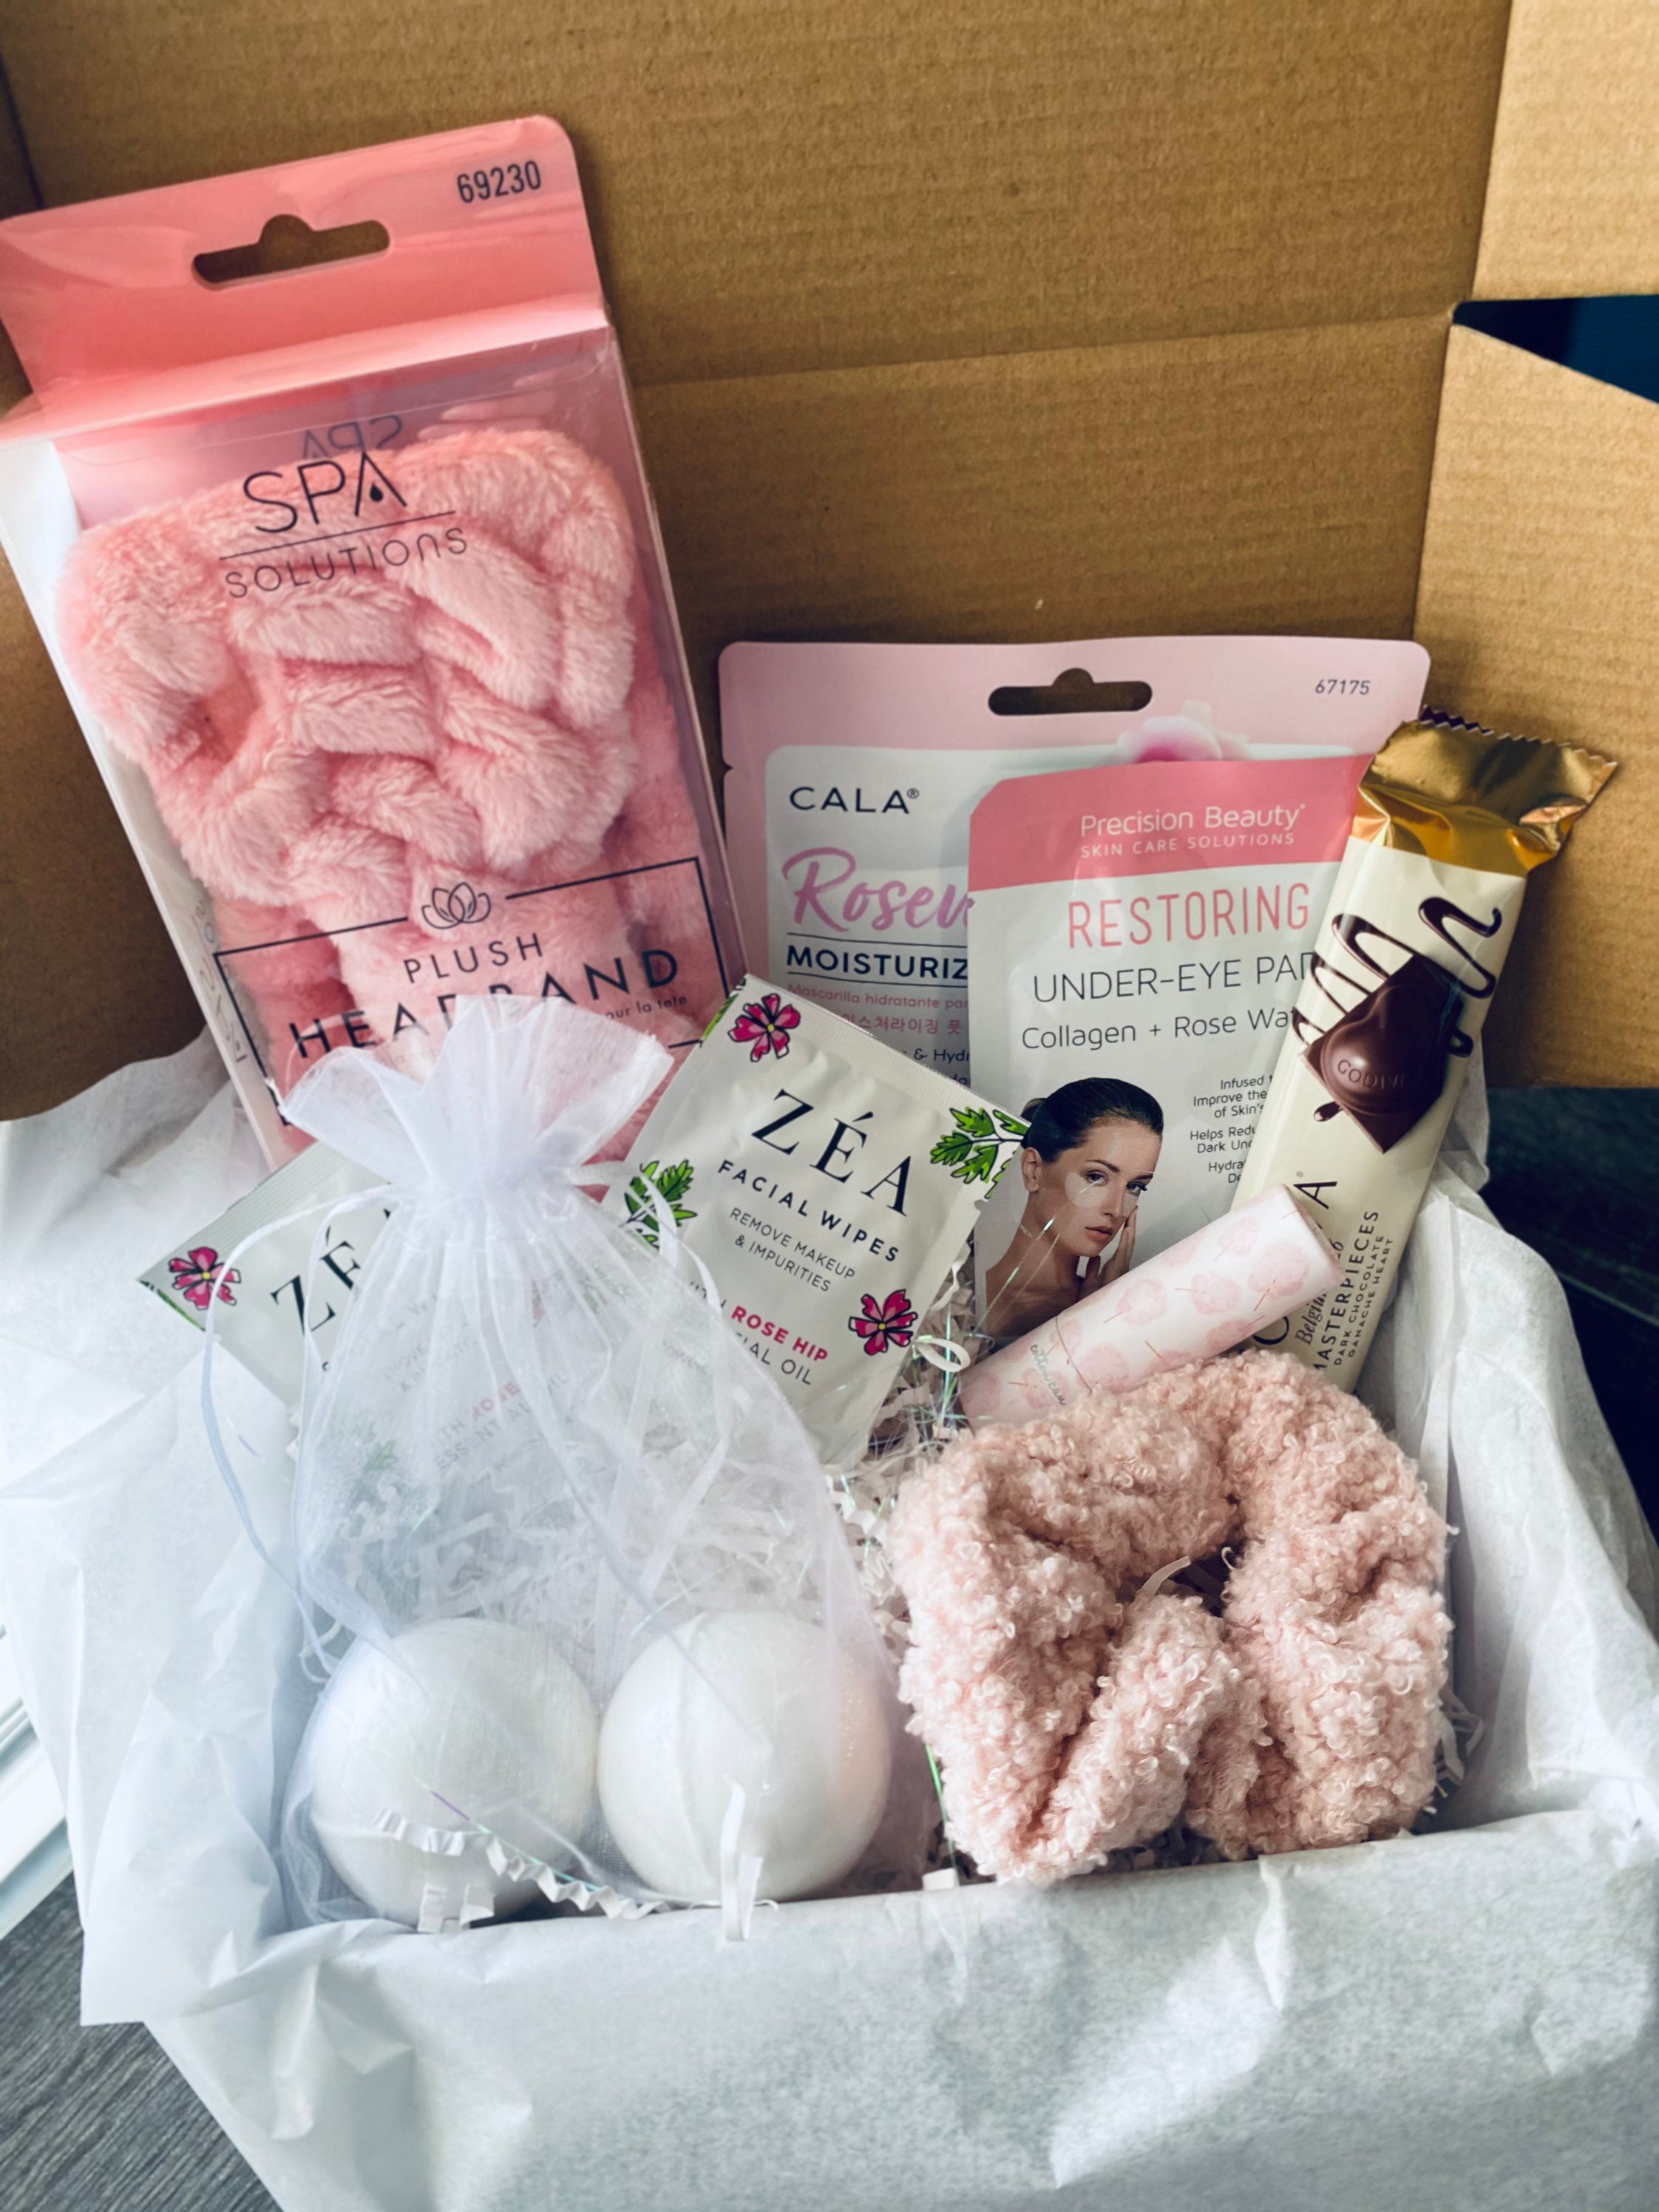 Pink Care Package / Self Care Kit / Health and Wellness Box / Gifts for  Women / Relaxation Kits / Pink Beauty Boxes 